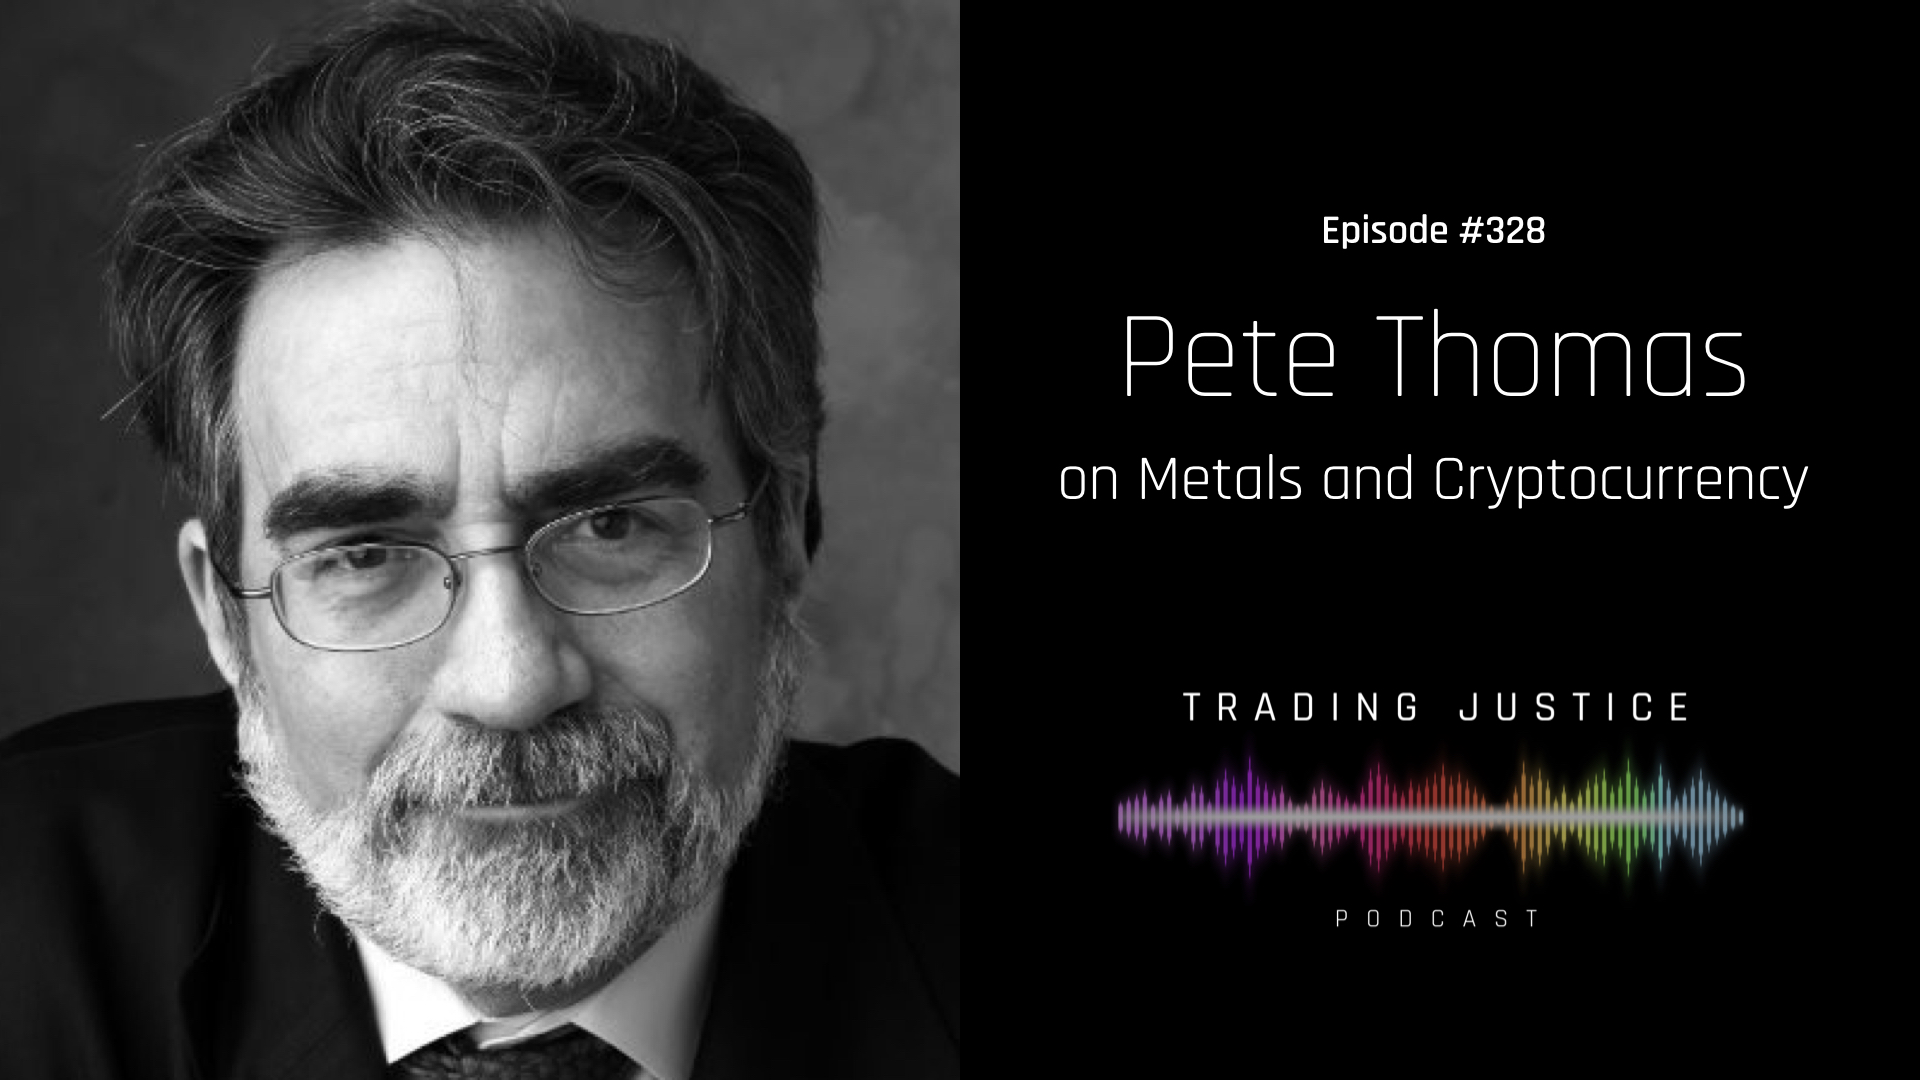 Trading Justice Episode 328: Pete Thomas on Metals and Cryptocurrency